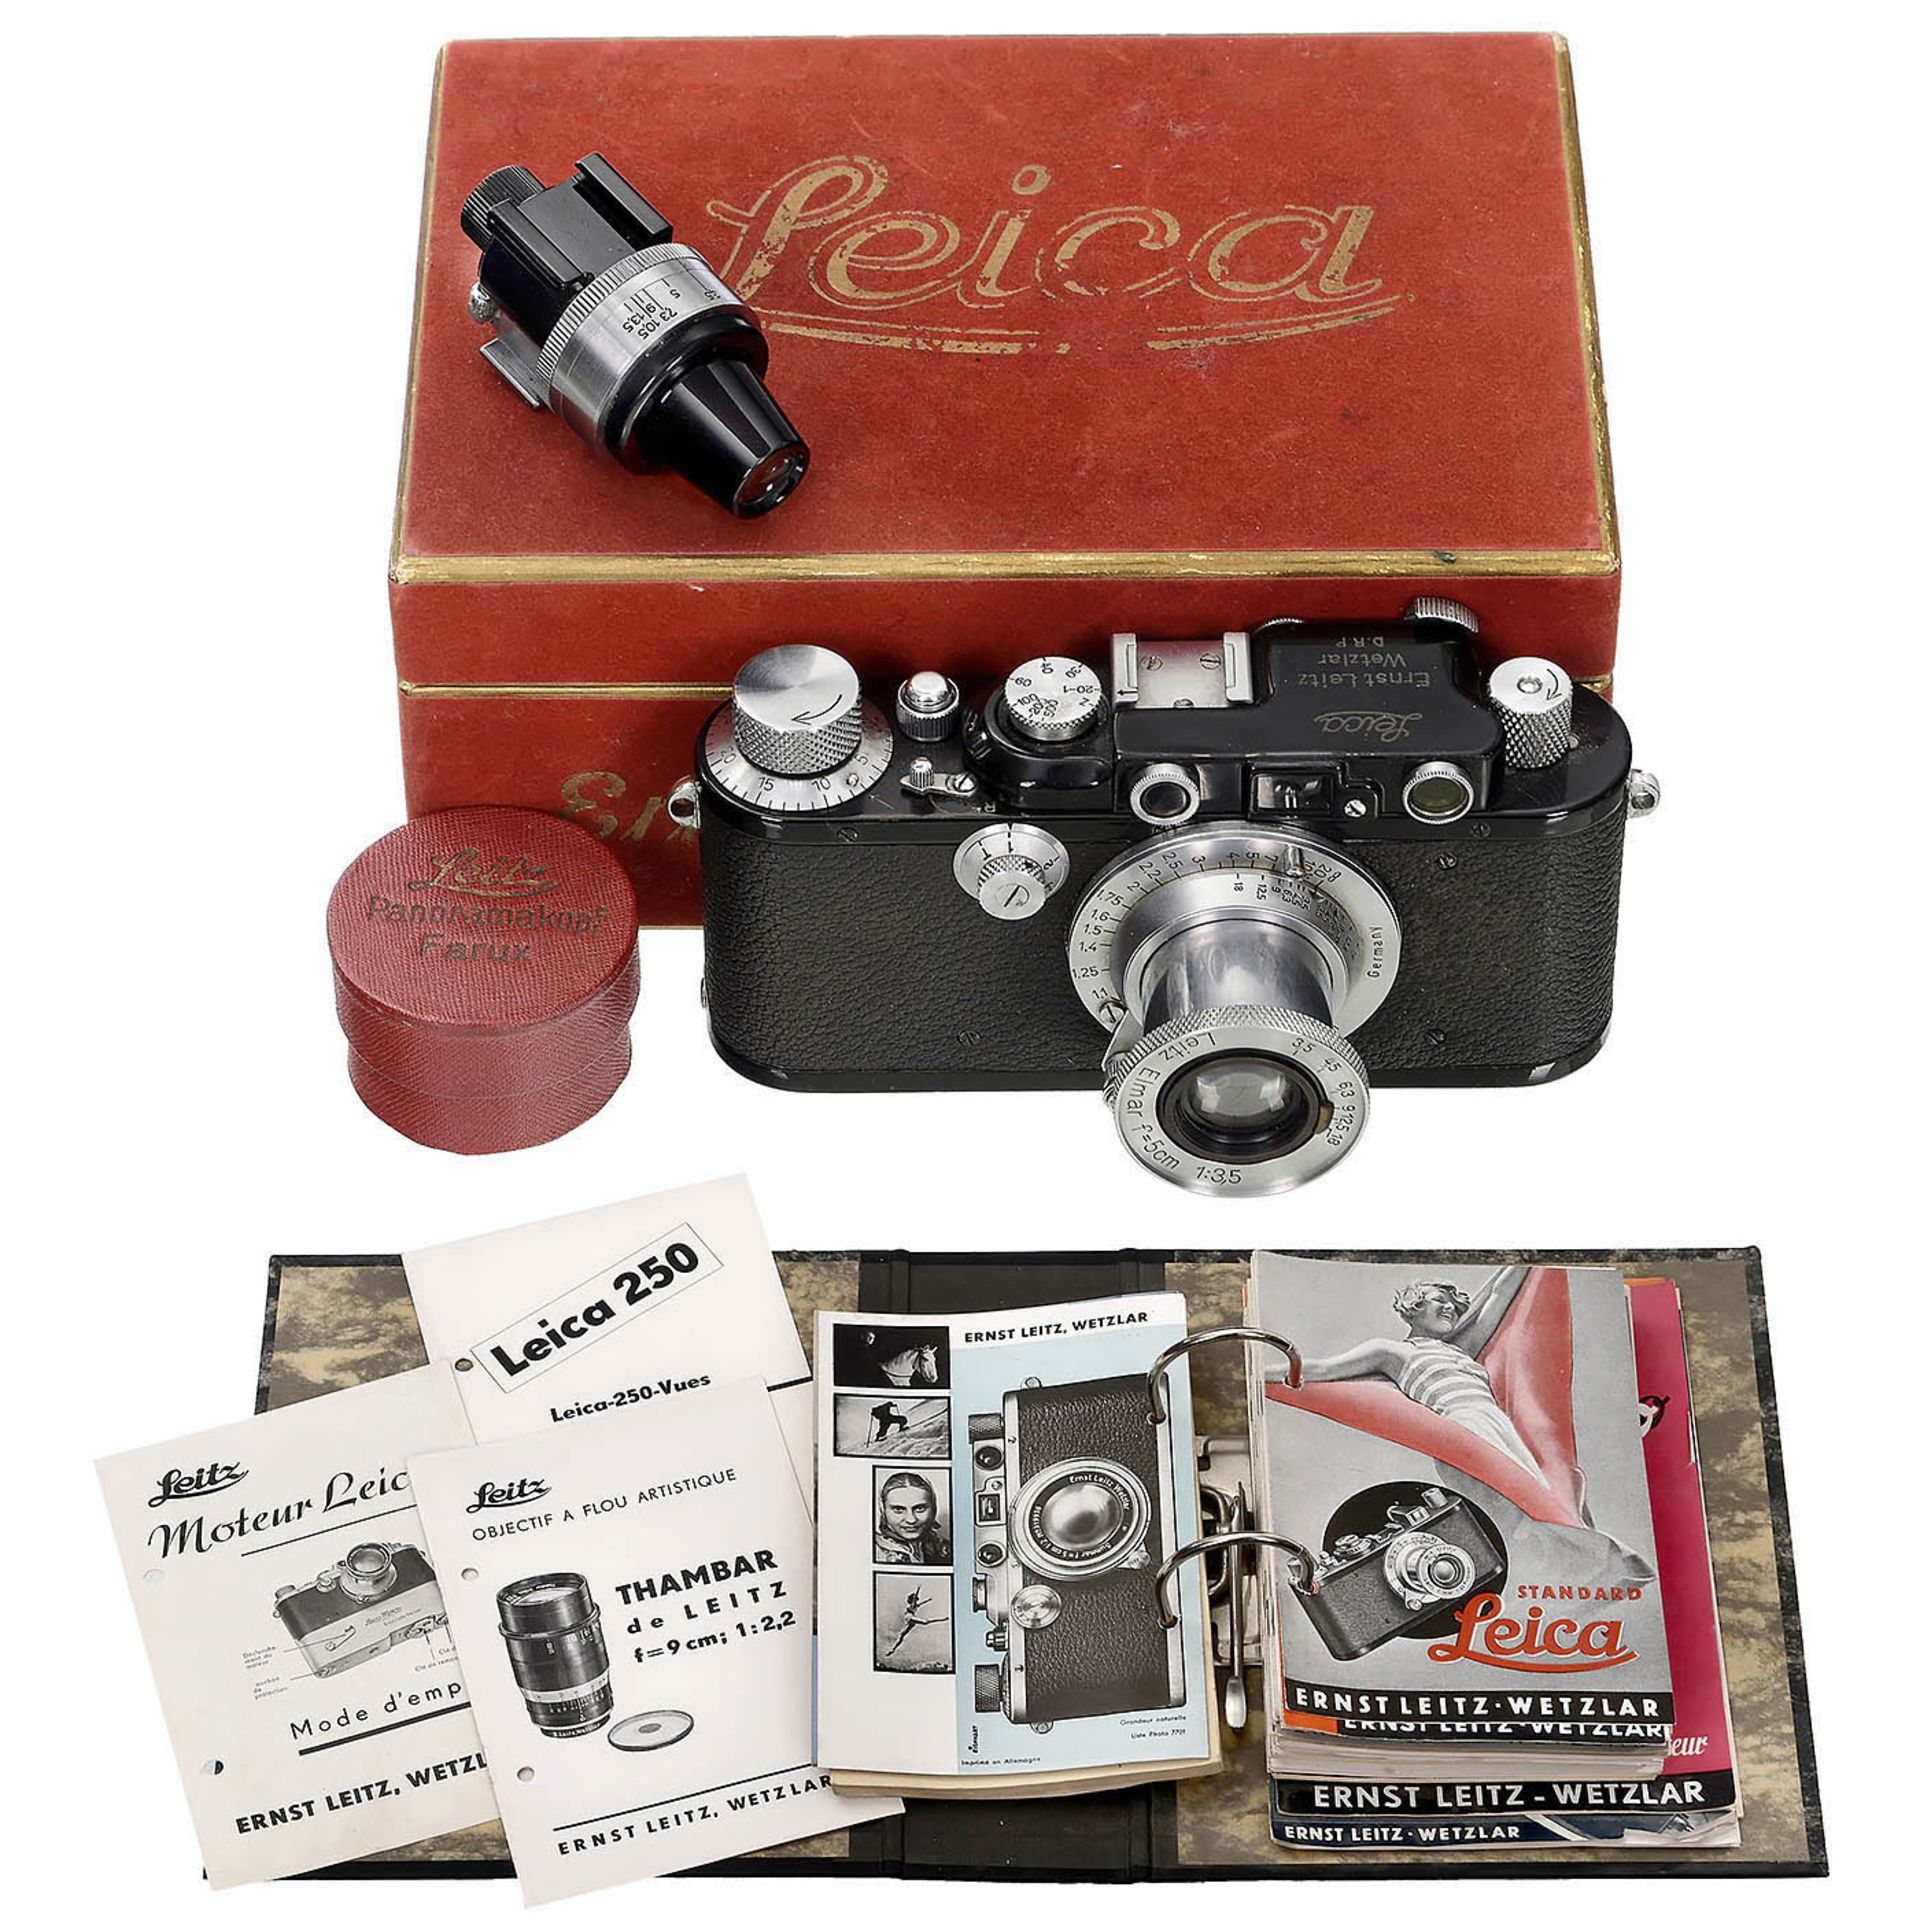 Leica III Camera with VIDOM, Brochure Collection and 2 Red Boxes, 1933-39